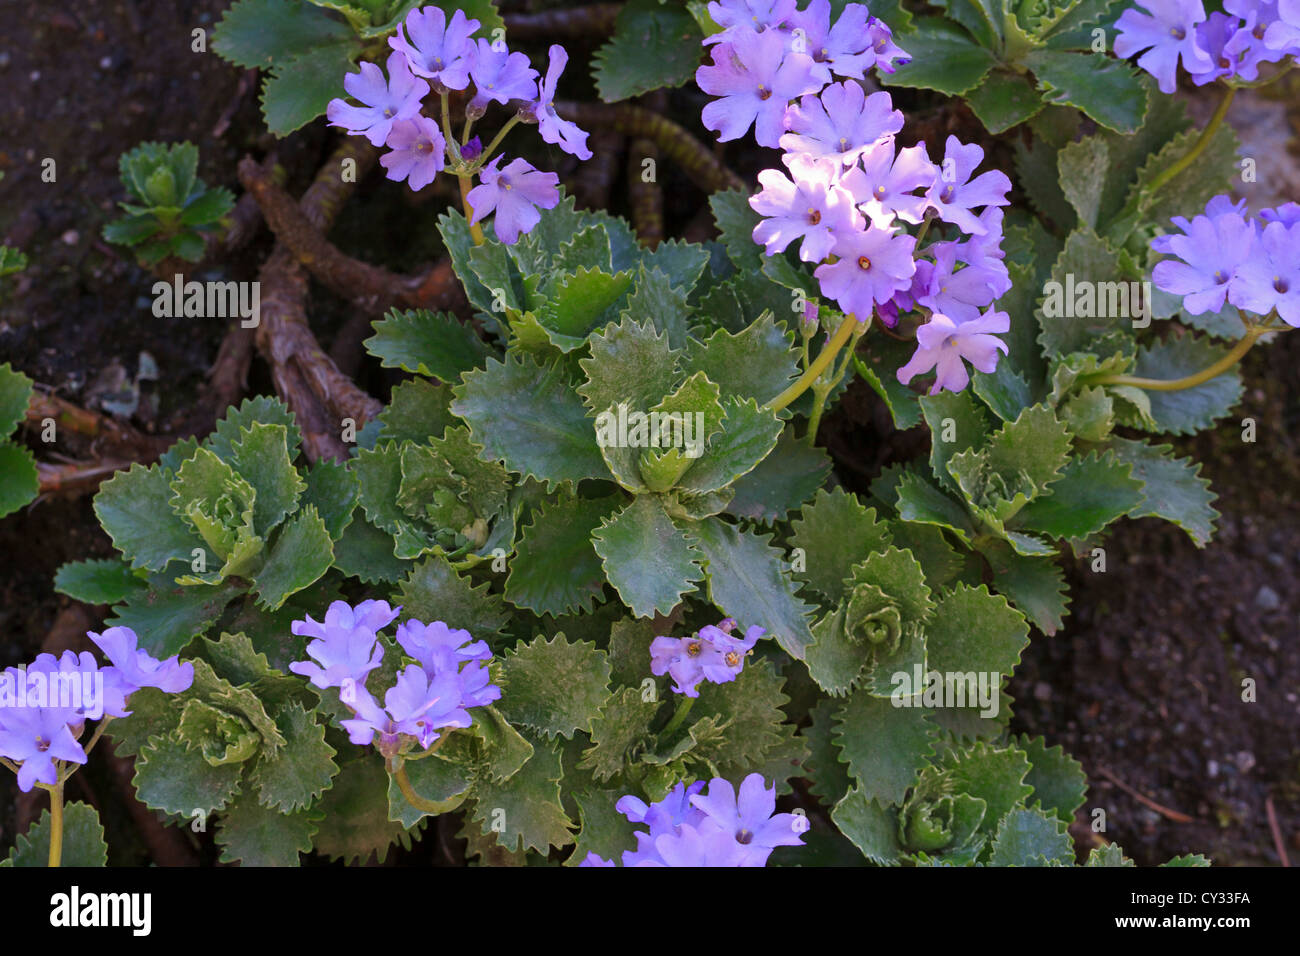 Primula Marginata. Soft mauve flowers and striking toothed leaves in rosettes. Stock Photo